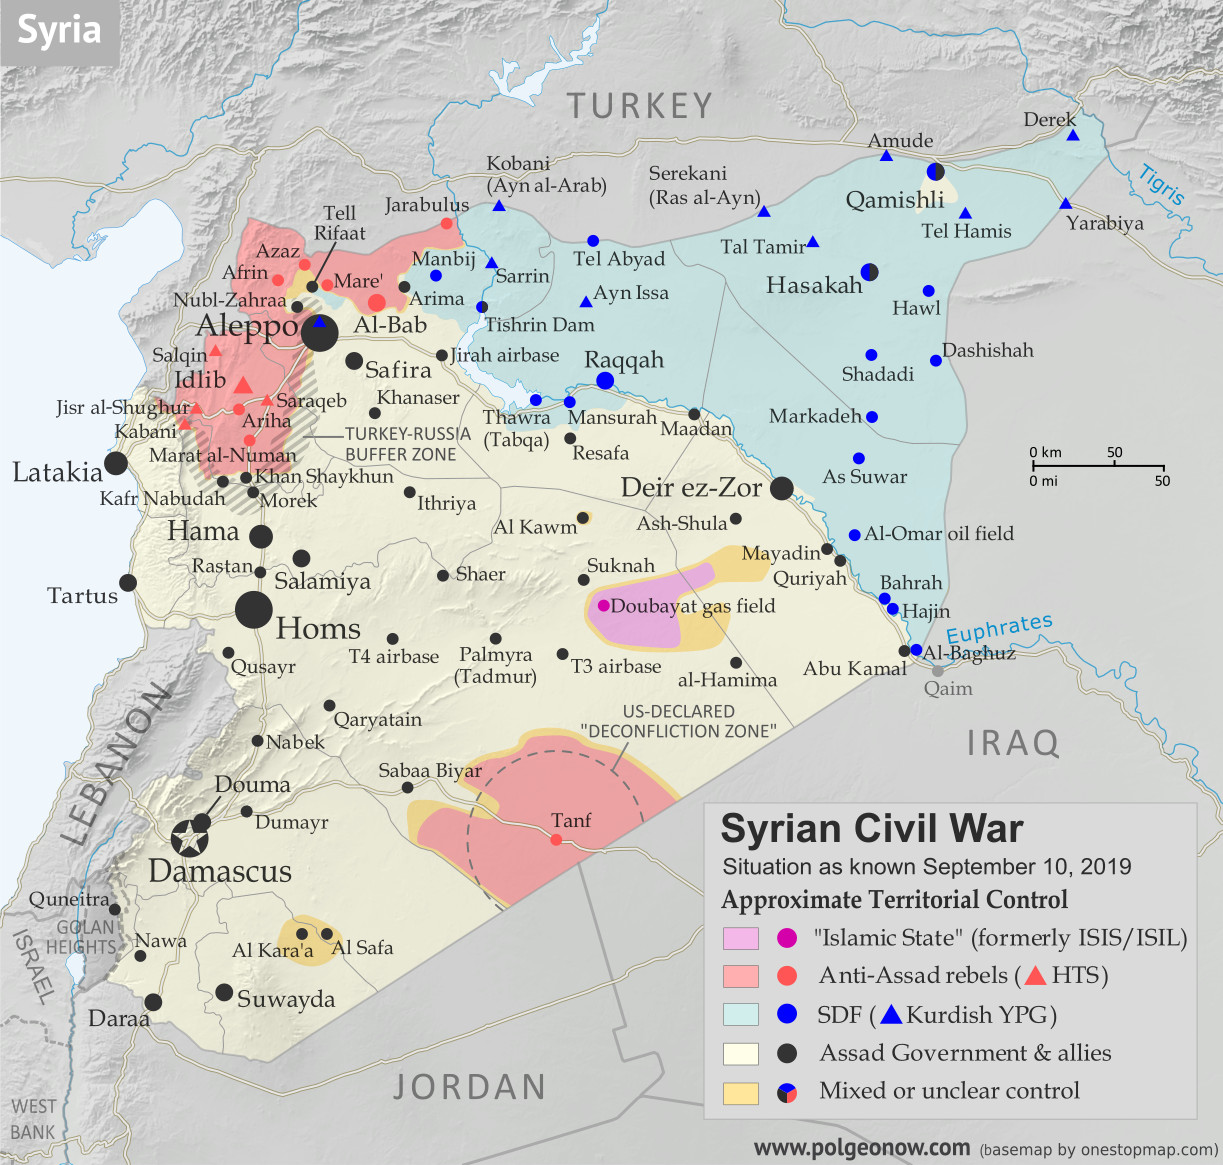 Map of Syrian Civil War (Syria control map): Territorial control in Syria in September 2019 (Free Syrian Army rebels, Kurdish YPG, Syrian Democratic Forces (SDF), Hayat Tahrir al-Sham (HTS / Al-Nusra Front), Islamic State (ISIS/ISIL), and others). Includes US deconfliction zone and Turkey-Russia demilitarized buffer zone, plus locations of conflict and territorial control changes, including Khan Shaykhun, Kabani, Morek, and more. Colorblind accessible.